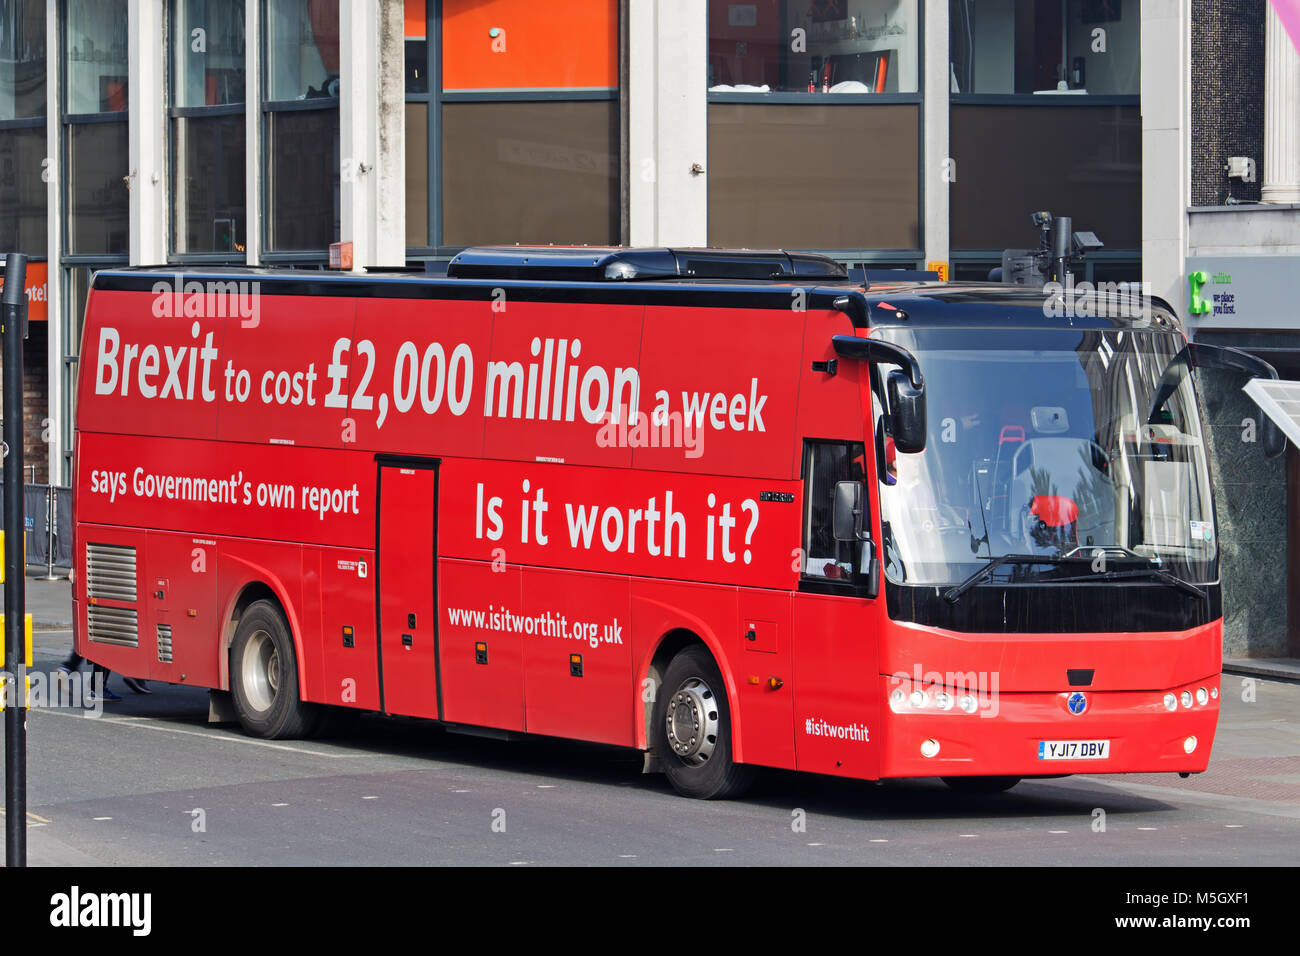 Liverpool, UK. 23rd February 2018. Anti-Brexit campaigners big red bus  arrives in Derby Sq Liverpool. The "Is It Worth It?" campaign claims the  cost of leaving the EU will be £2,000m per